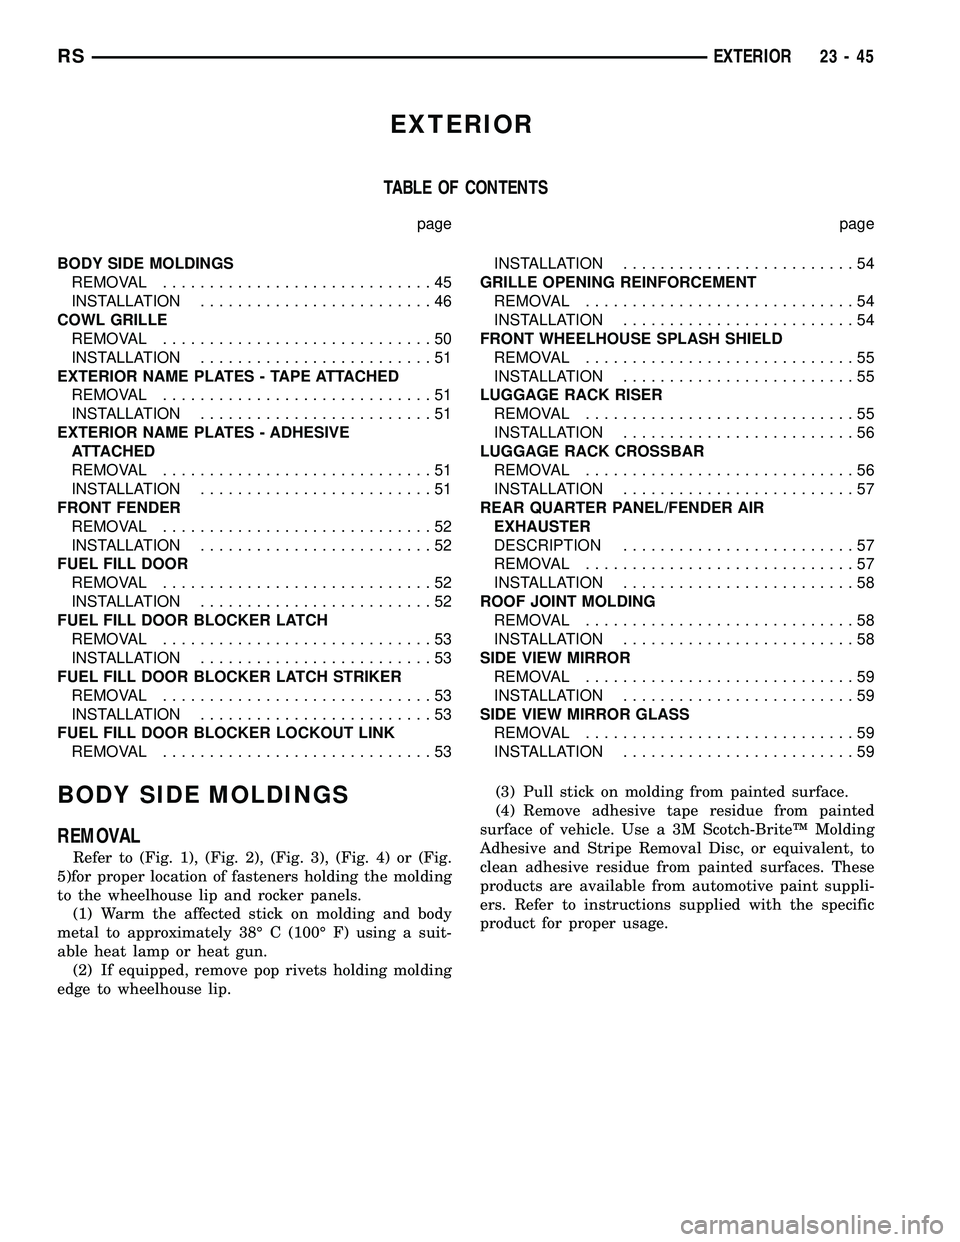 DODGE TOWN AND COUNTRY 2004  Service Manual EXTERIOR
TABLE OF CONTENTS
page page
BODY SIDE MOLDINGS
REMOVAL.............................45
INSTALLATION.........................46
COWL GRILLE
REMOVAL.............................50
INSTALLATION..